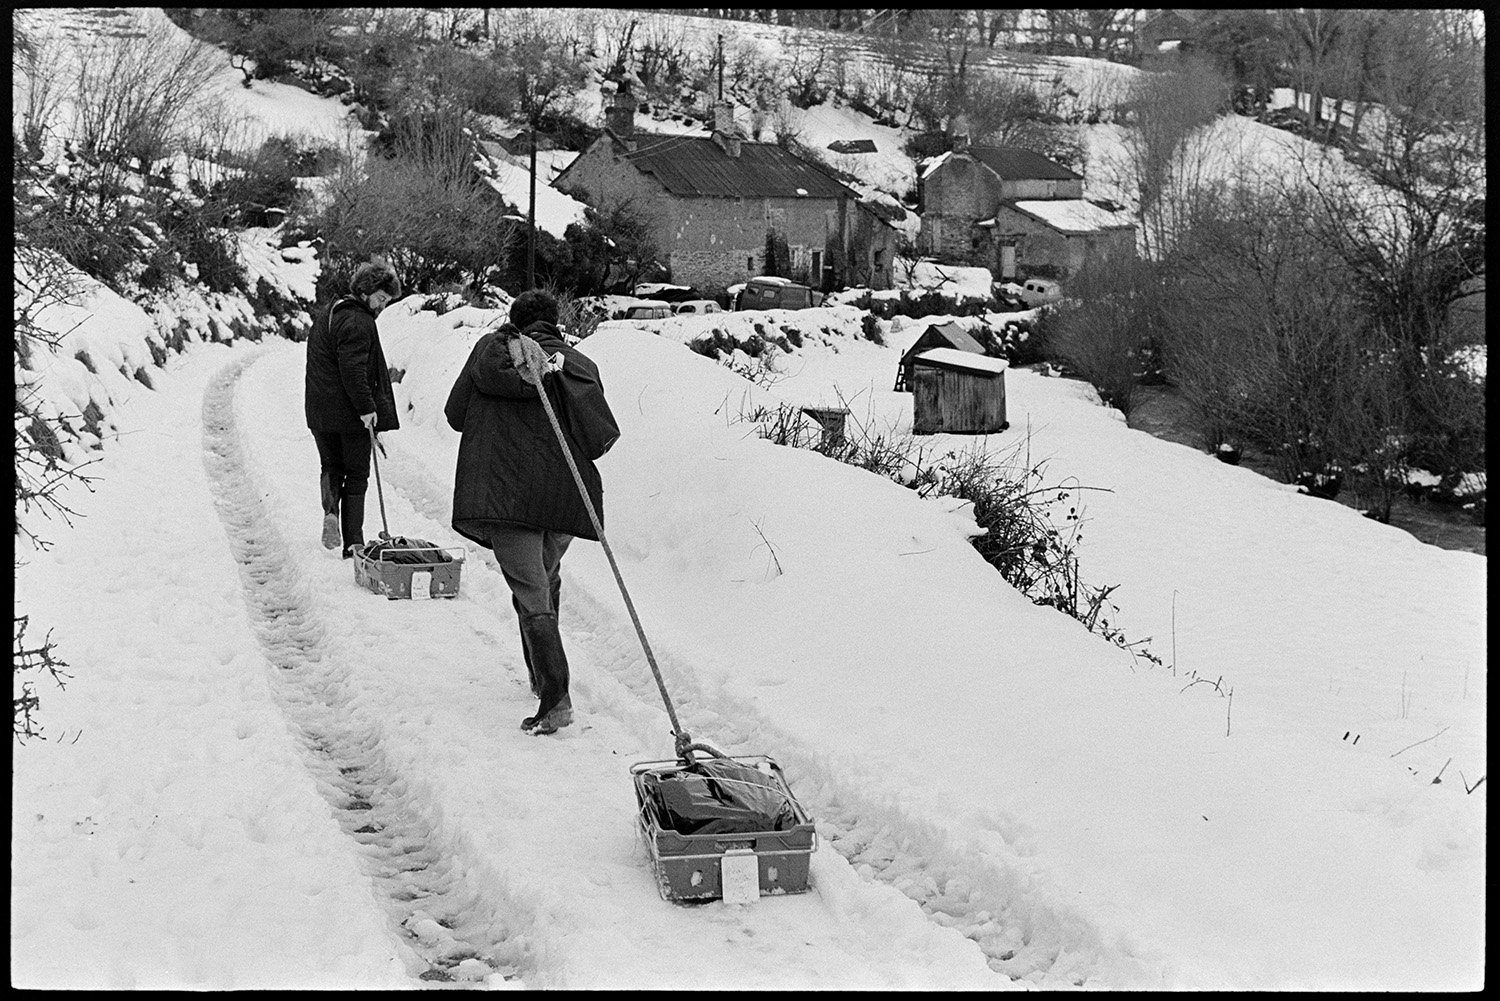 Snow, butcher setting off with meat on sledge for next village, Merton cut off. 
[Bill Davey, butcher, and another person dragging sledges with meat along a snow covered lane at Millhams, Dolton. They are going to deliver the meat to Merton which was cut off in the snow.]